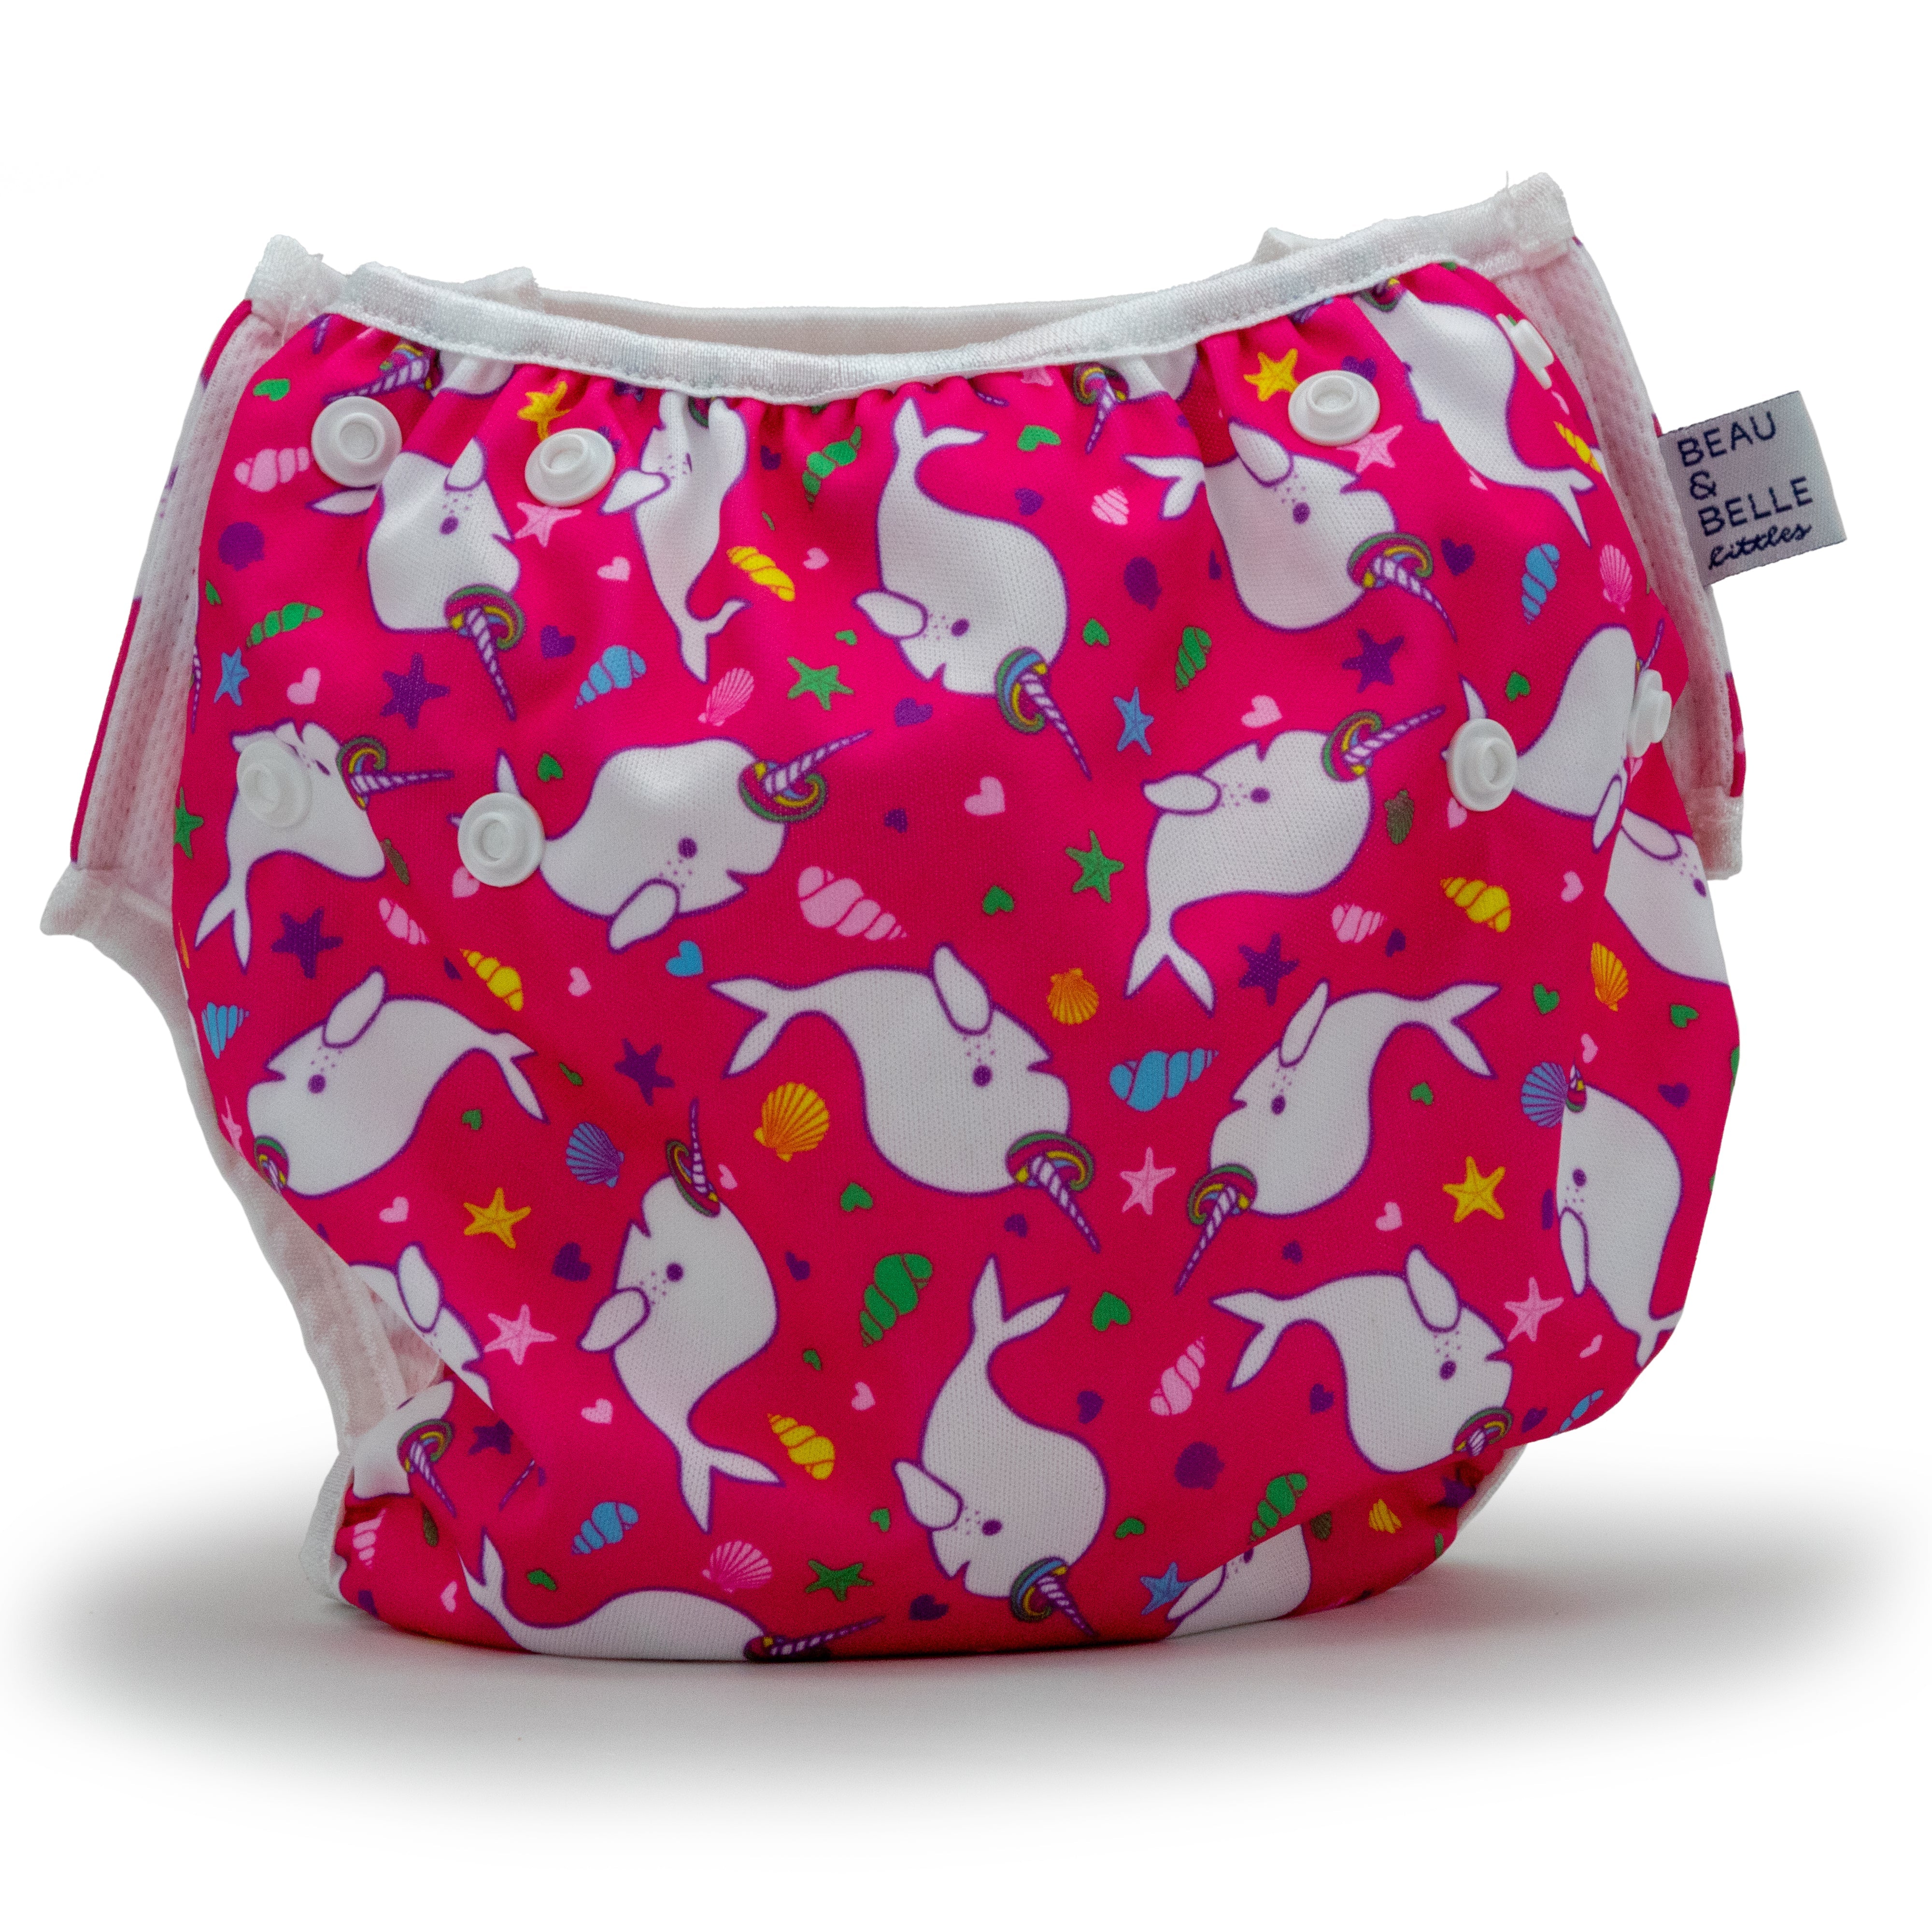 Narwhals 2-5 years Nageuret Swim Diaper (Hot Pink) by Beau & Belle Littles